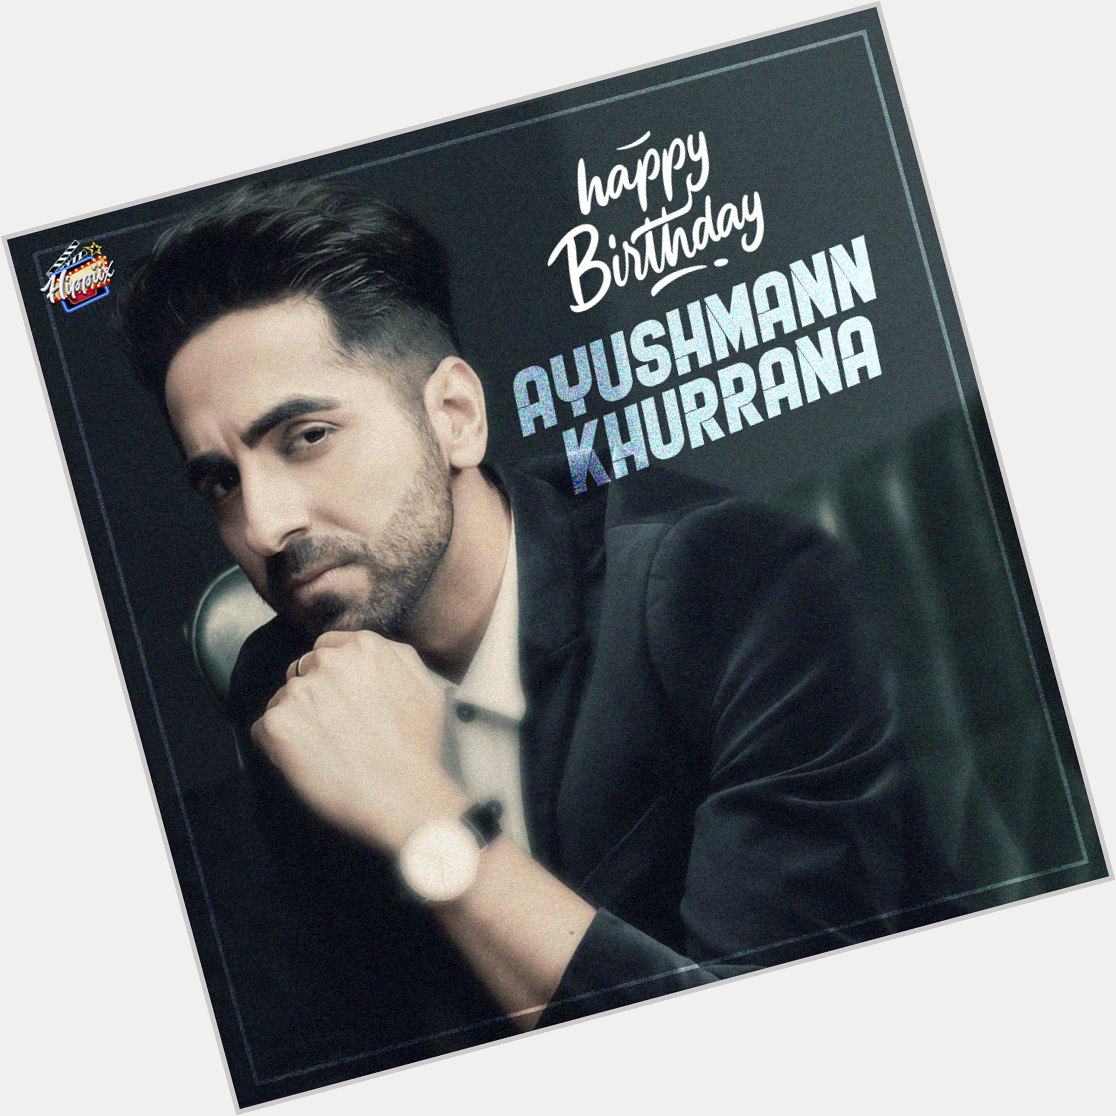 Hippiix wishes the outstanding performer Ayushmann Khurrana, a Happy Birthday. 